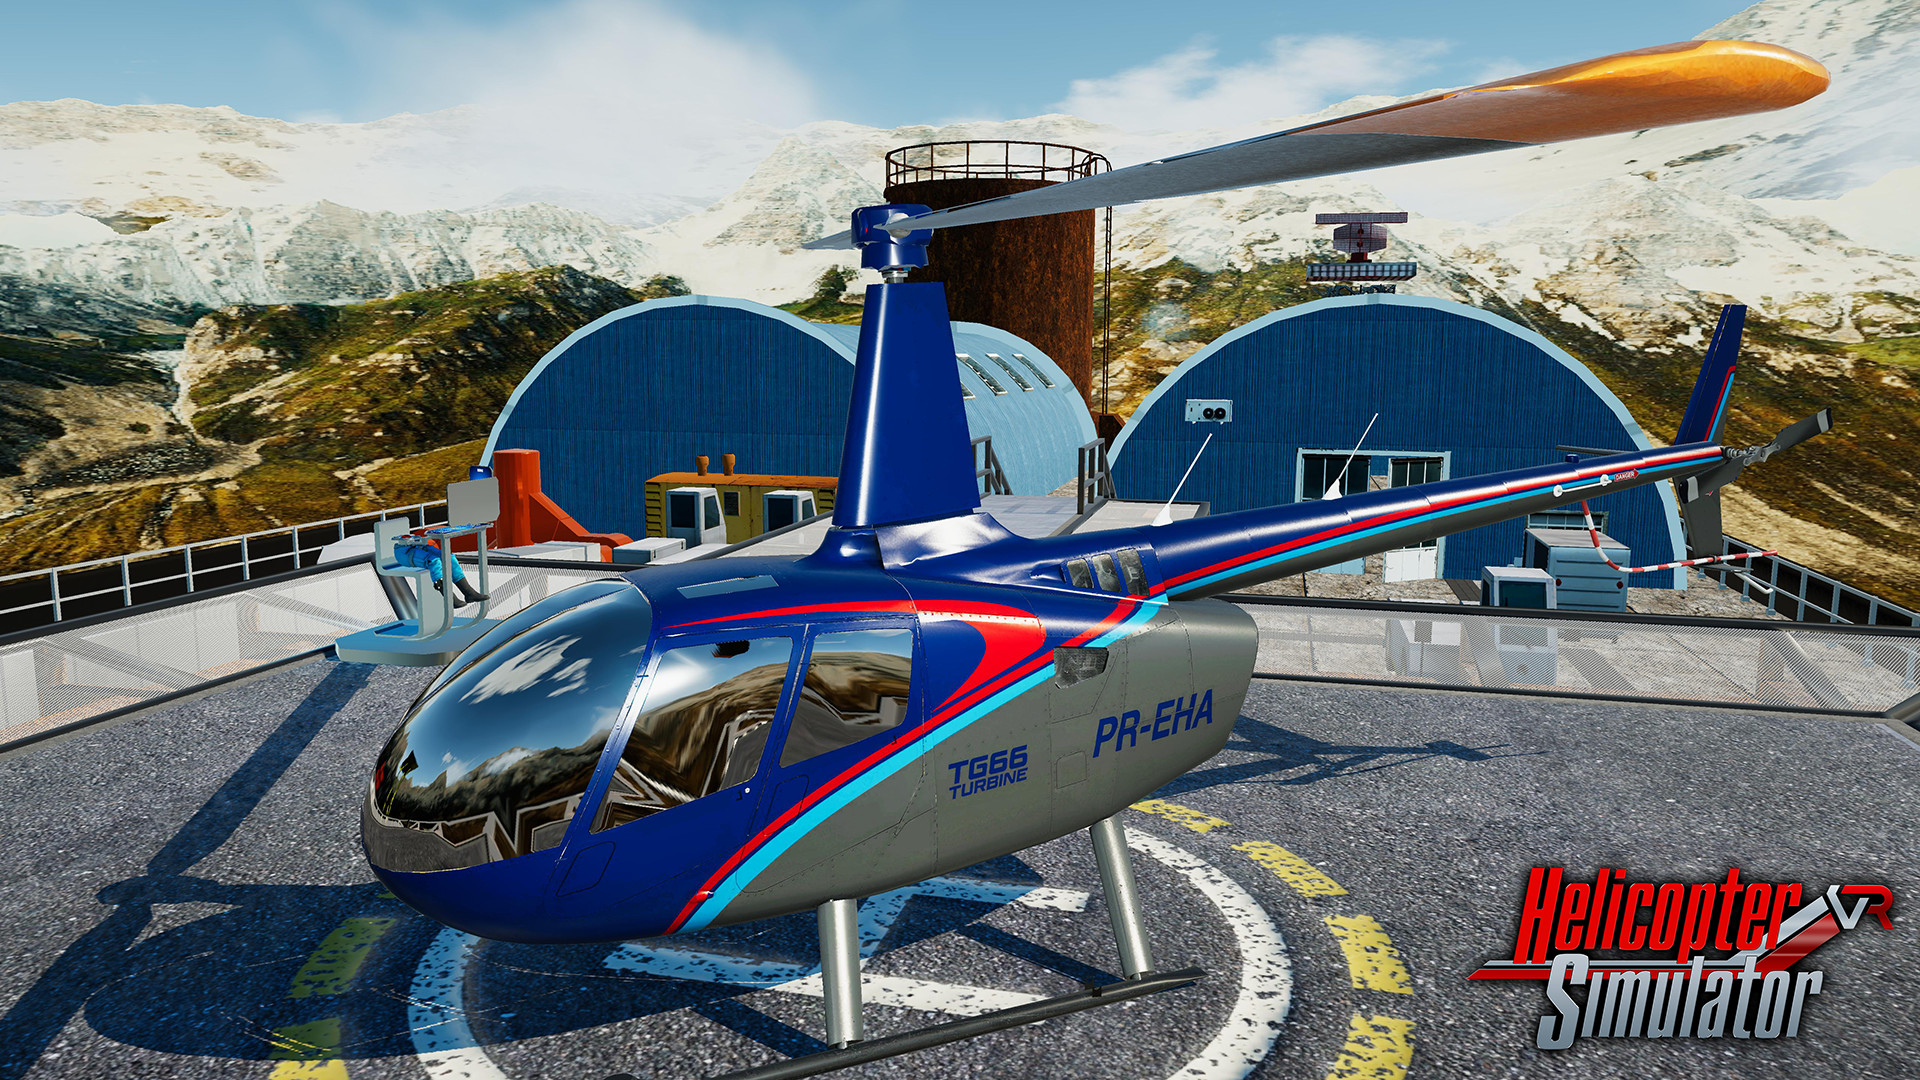 Helicopter Simulator VR 2021 Rescue Missions on